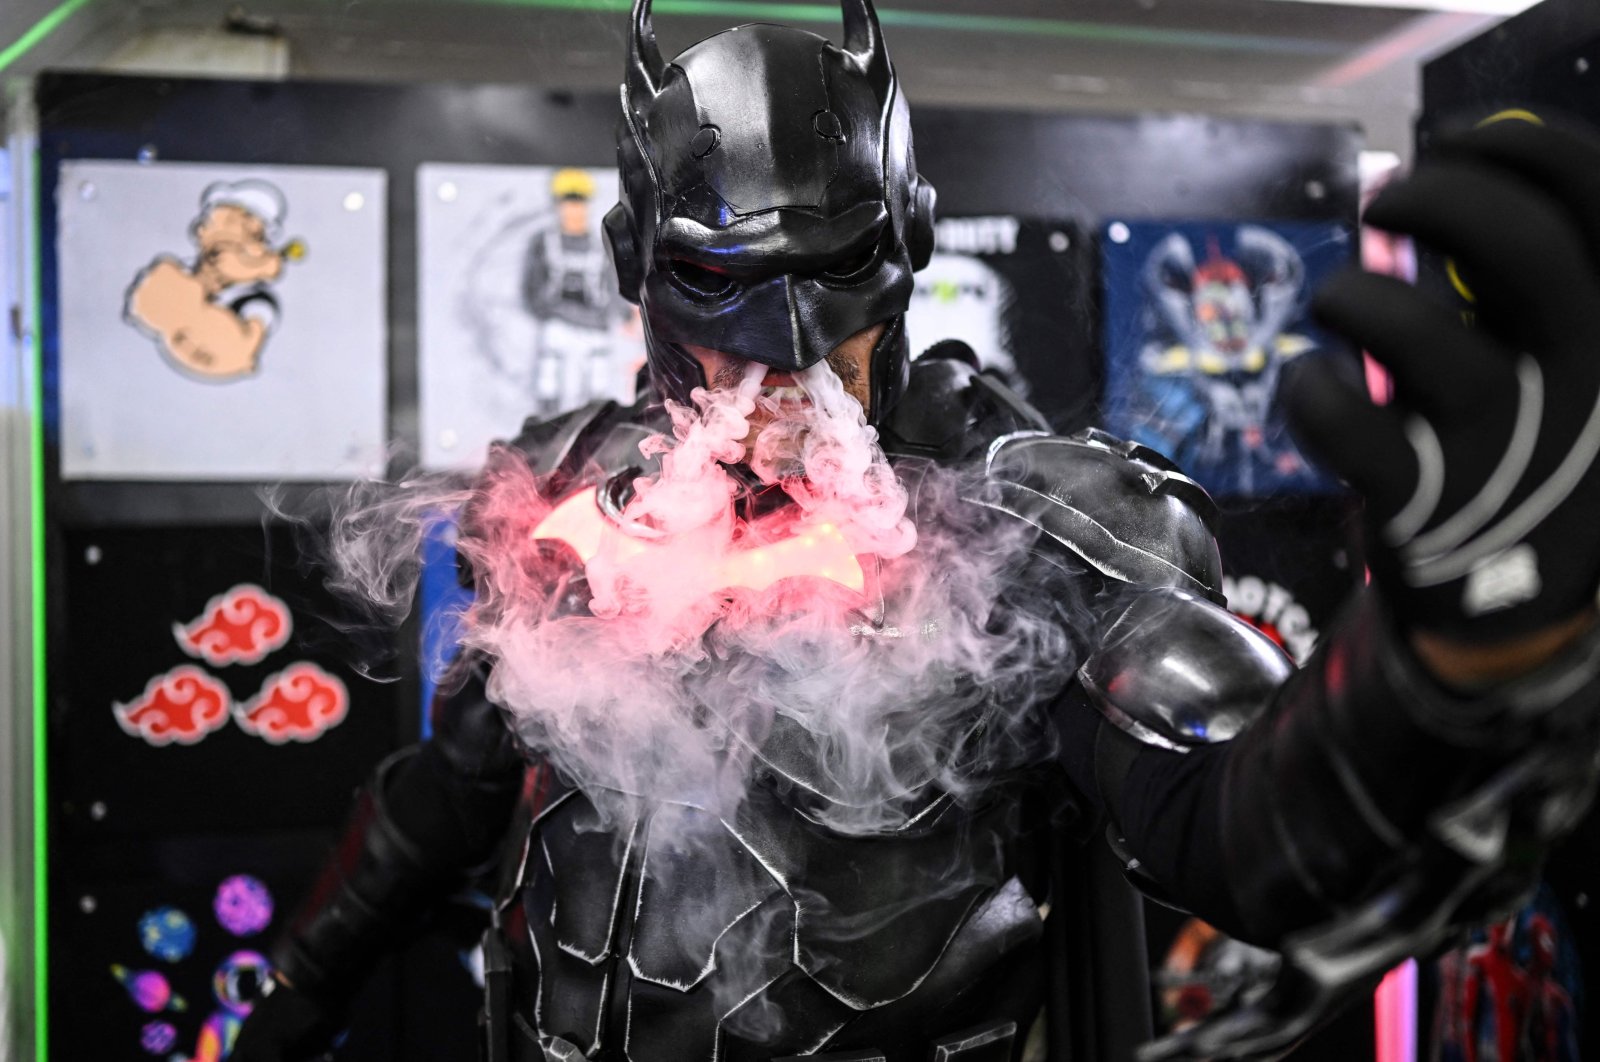 A man wears a Batman costume while performing at the Comic-Con convention in Caracas, Venezuela, July 17, 2022. (AFP Photo)